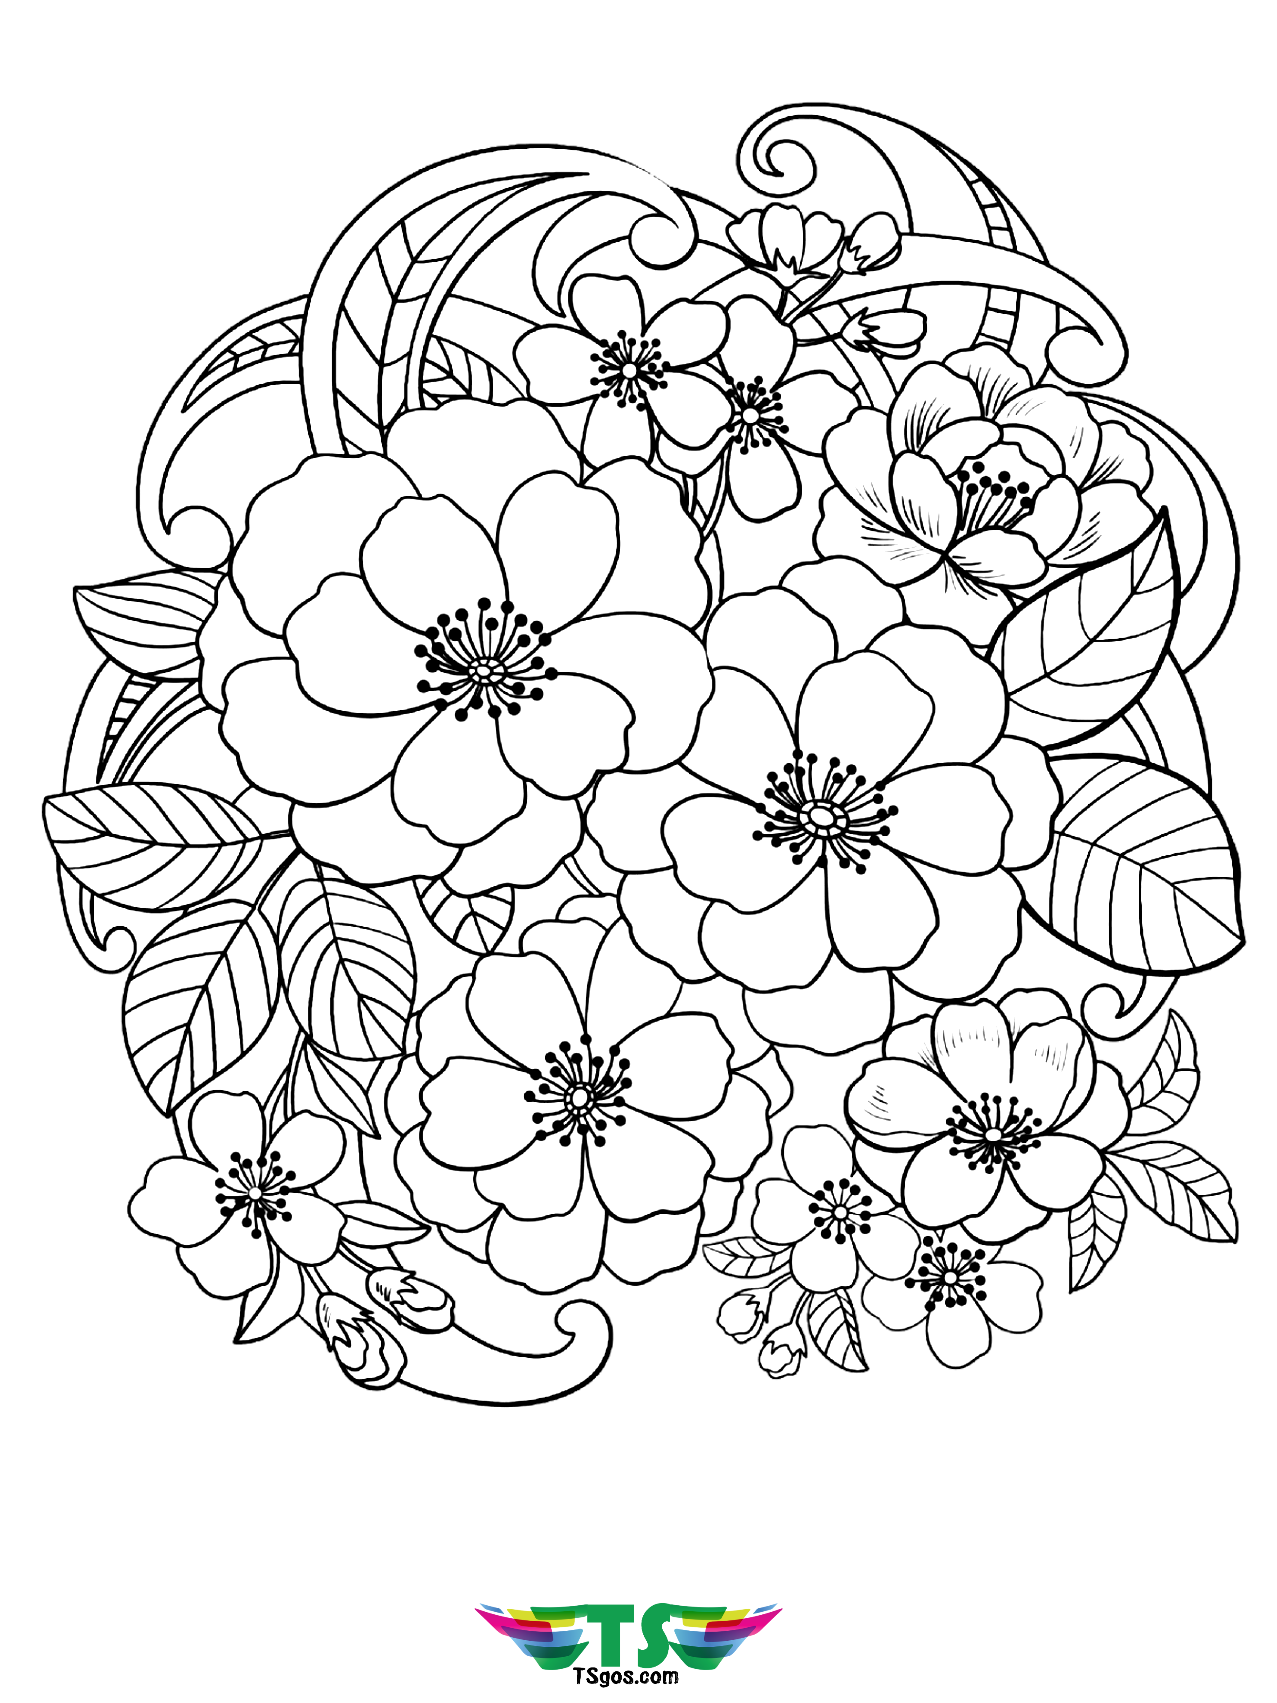 Sturdy Ultimate Optimism flower colouring in pictures to print ...